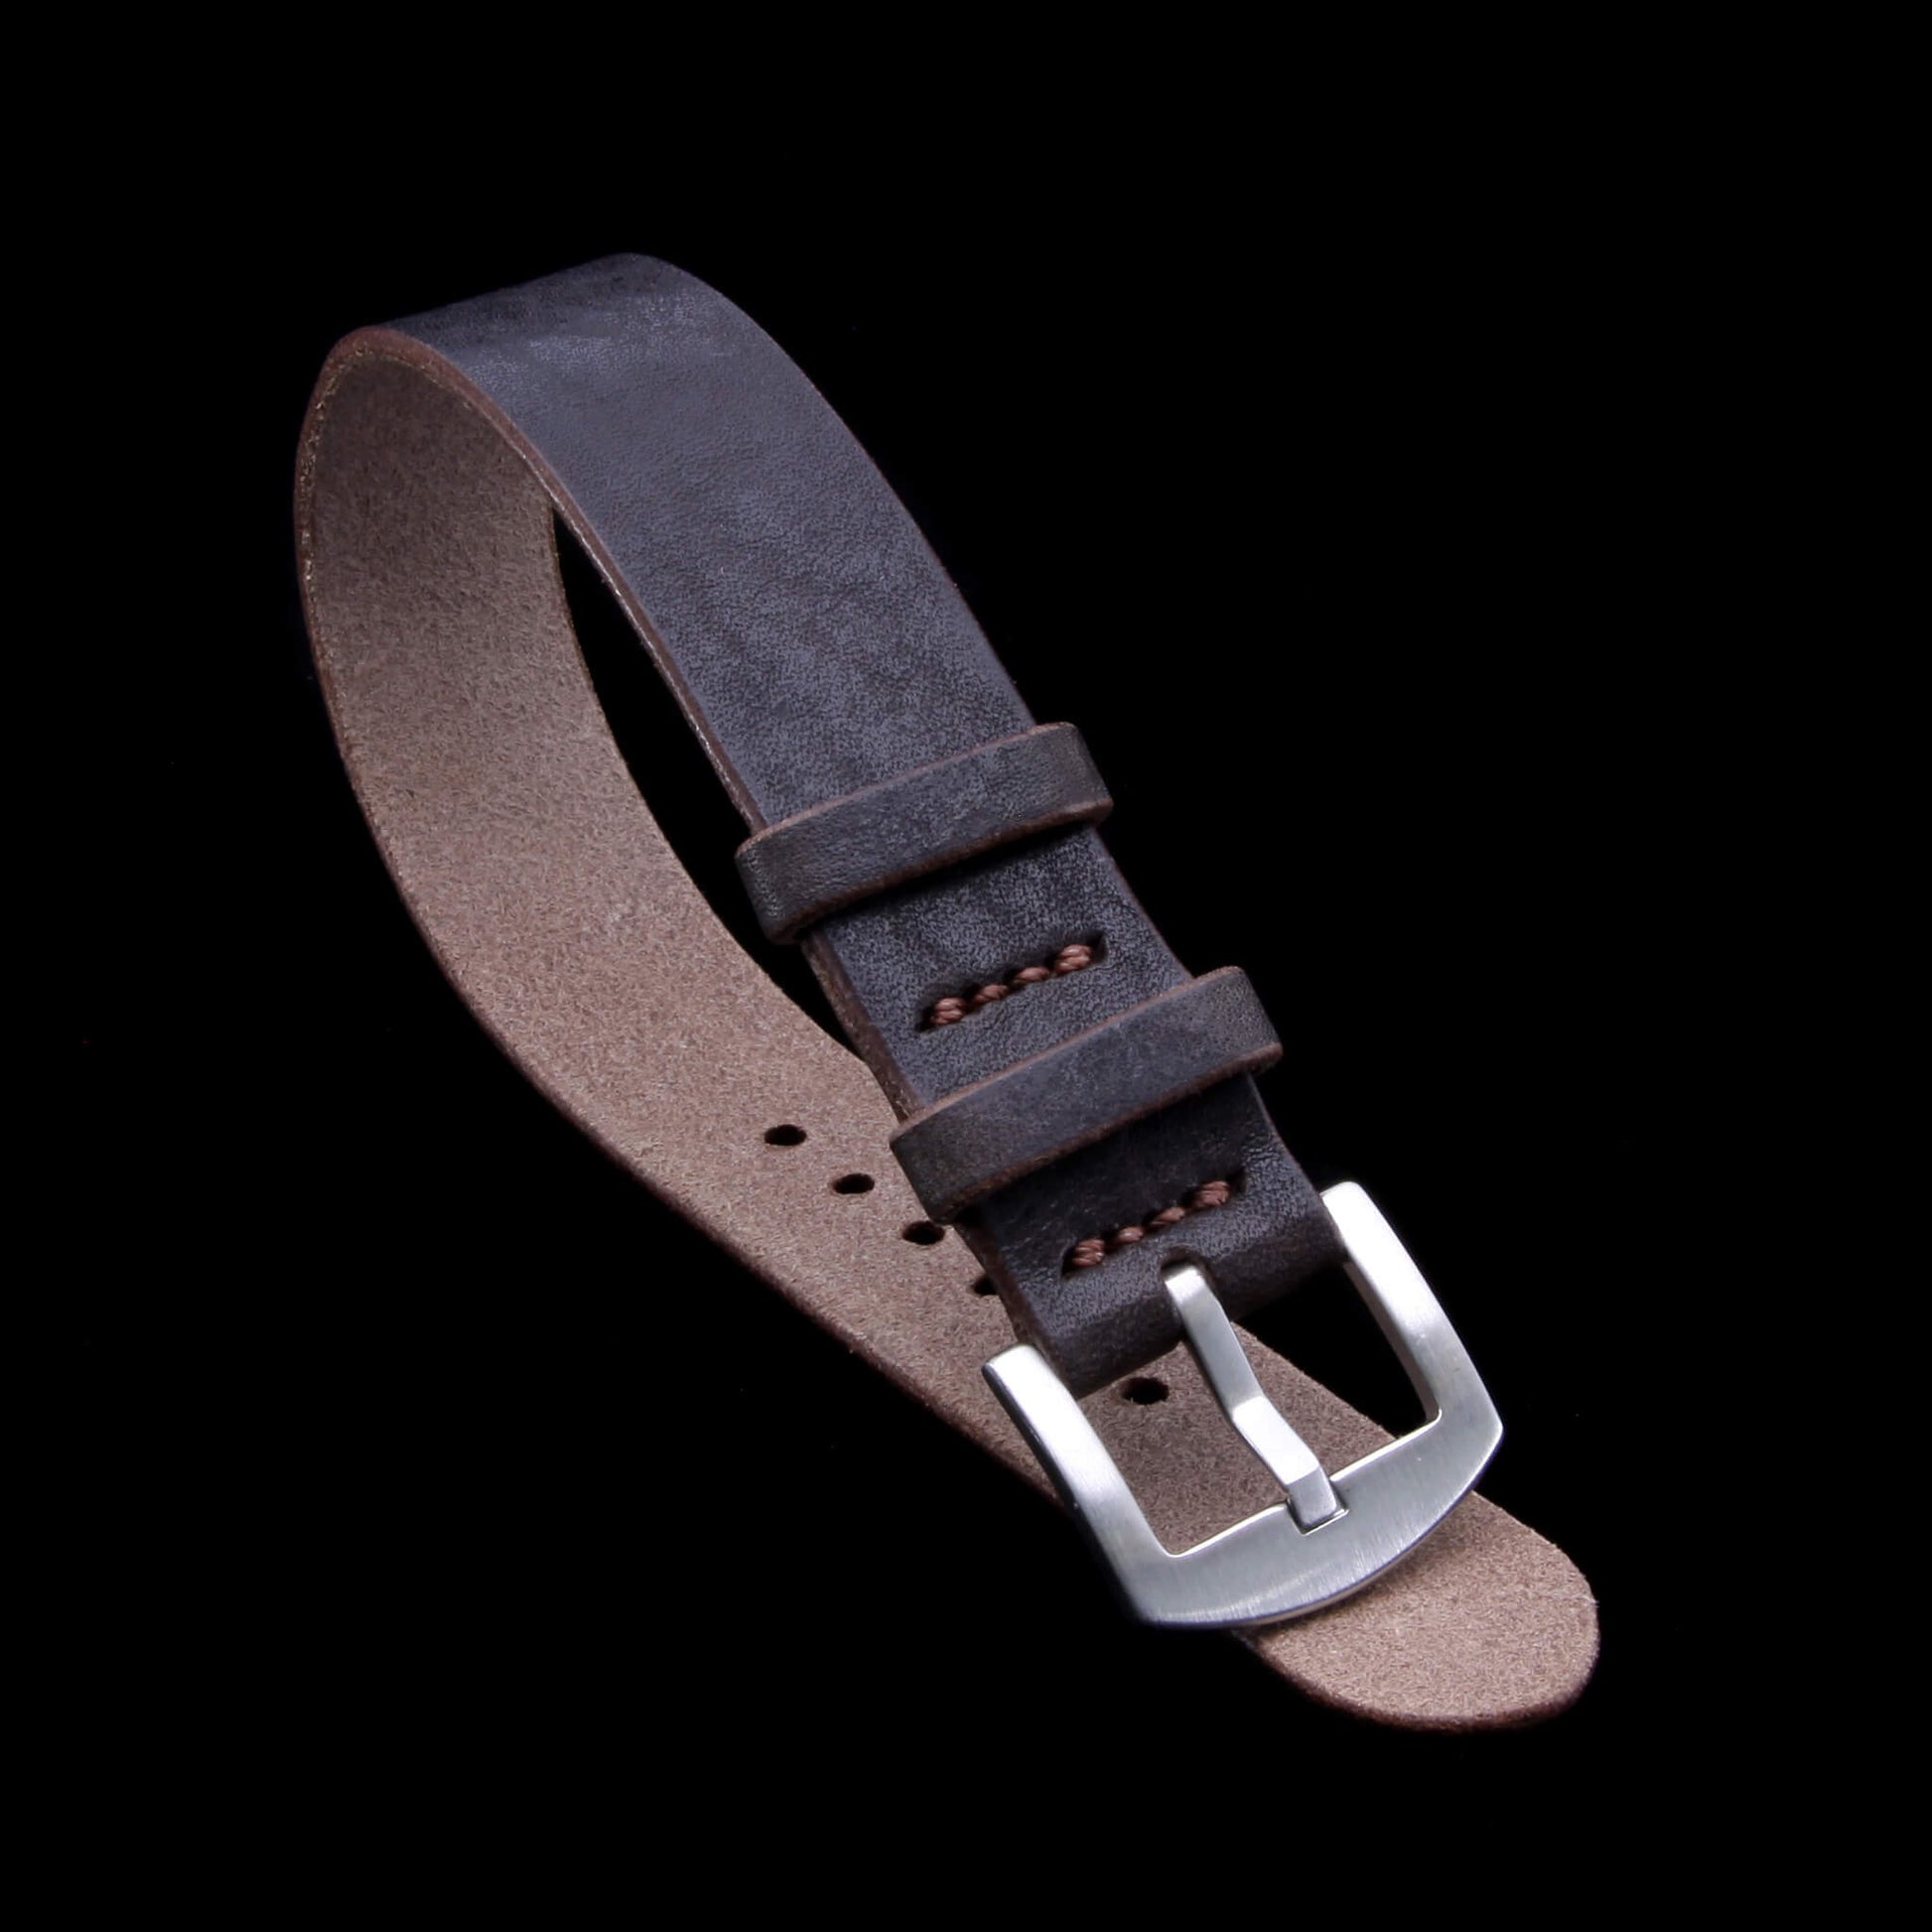 Single Pass Leather Watch Strap, 2-Keeper Style Vintage 406 | Full Grain Italian Vegetable-Tanned Leather | Cozy Handmade